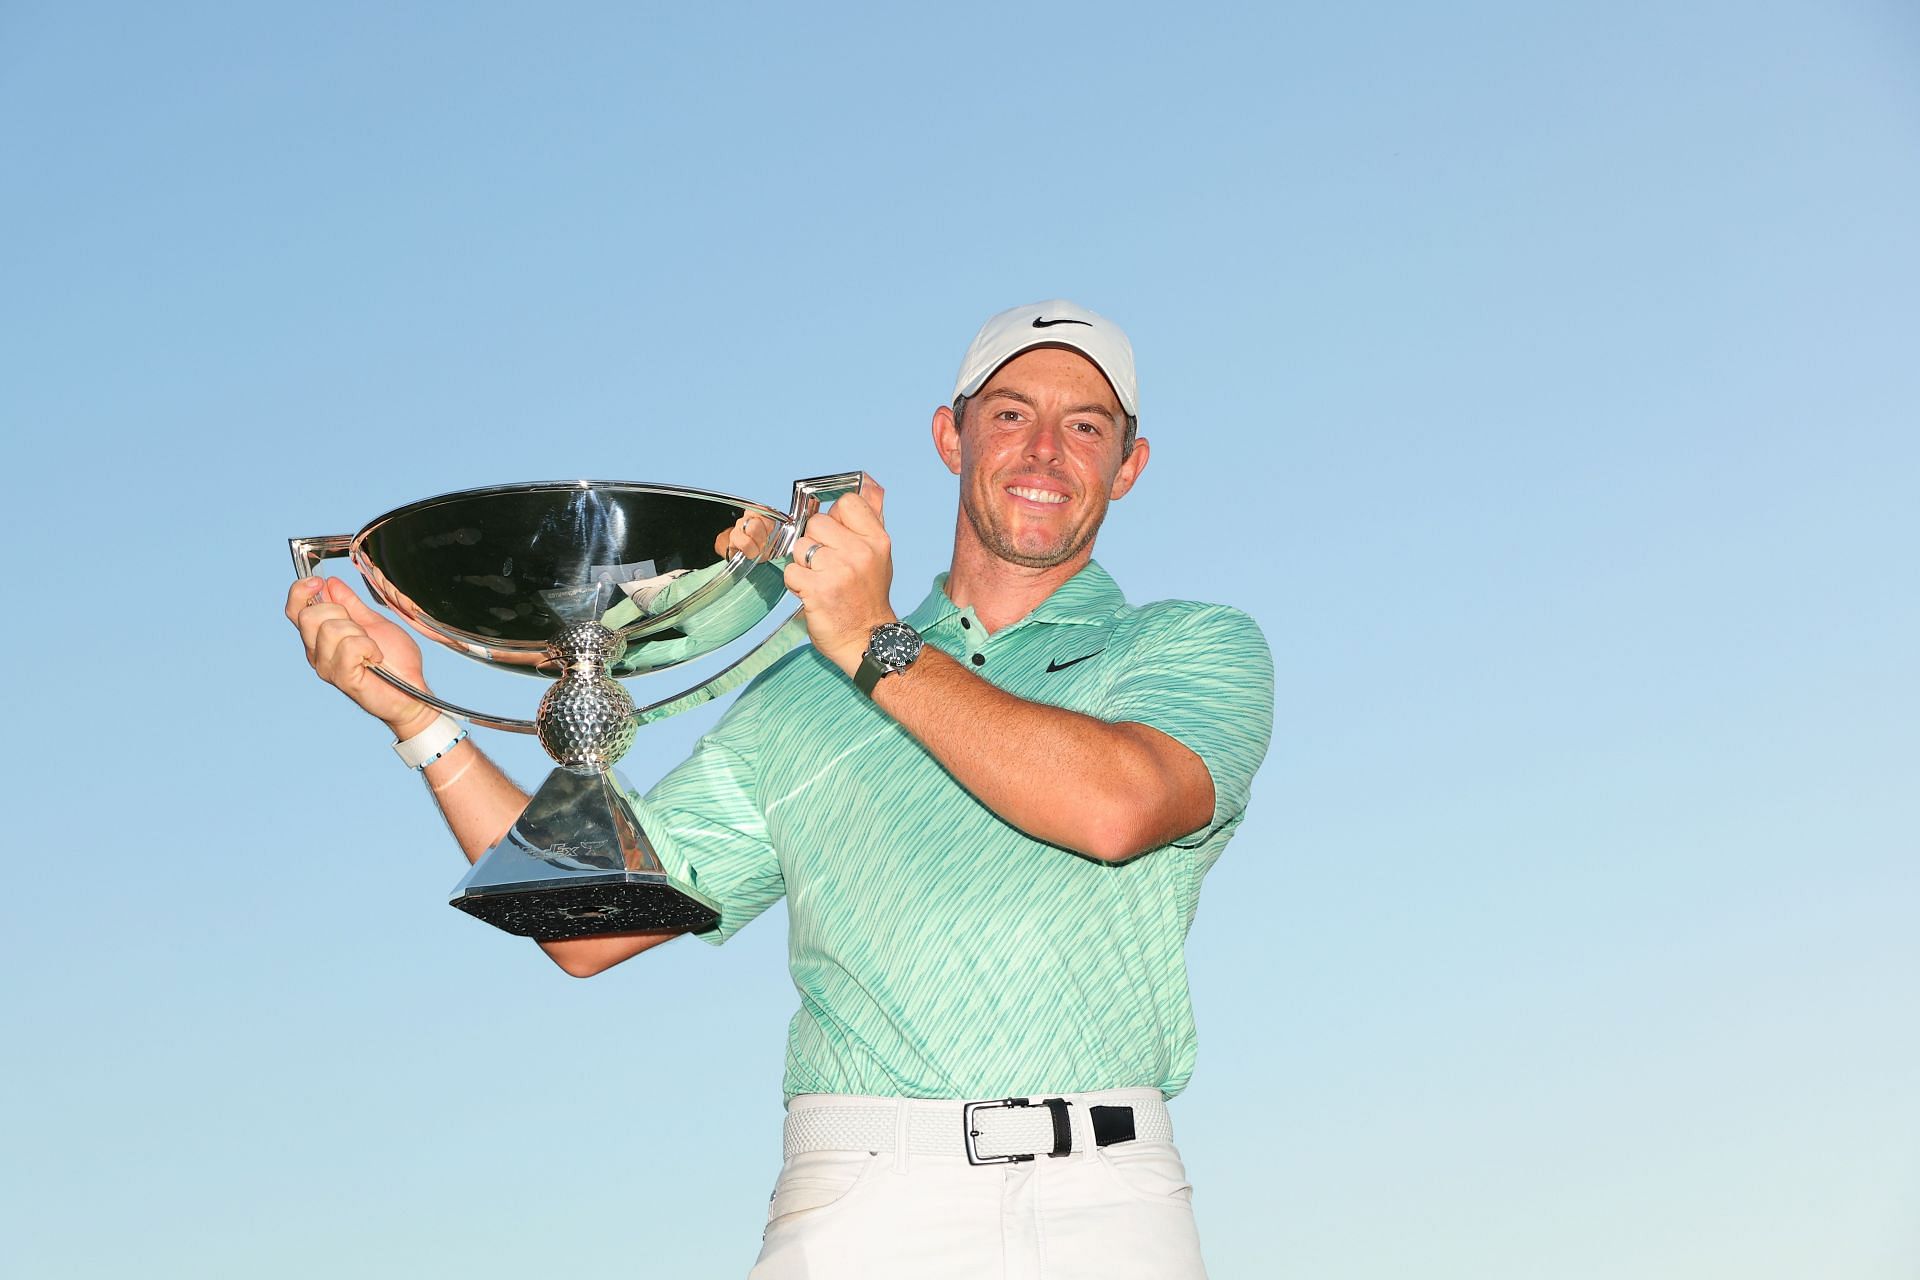 Rory McIlroy with the FedEx Cup trophy after winning the 2022 Tour Championship (via Getty Images)